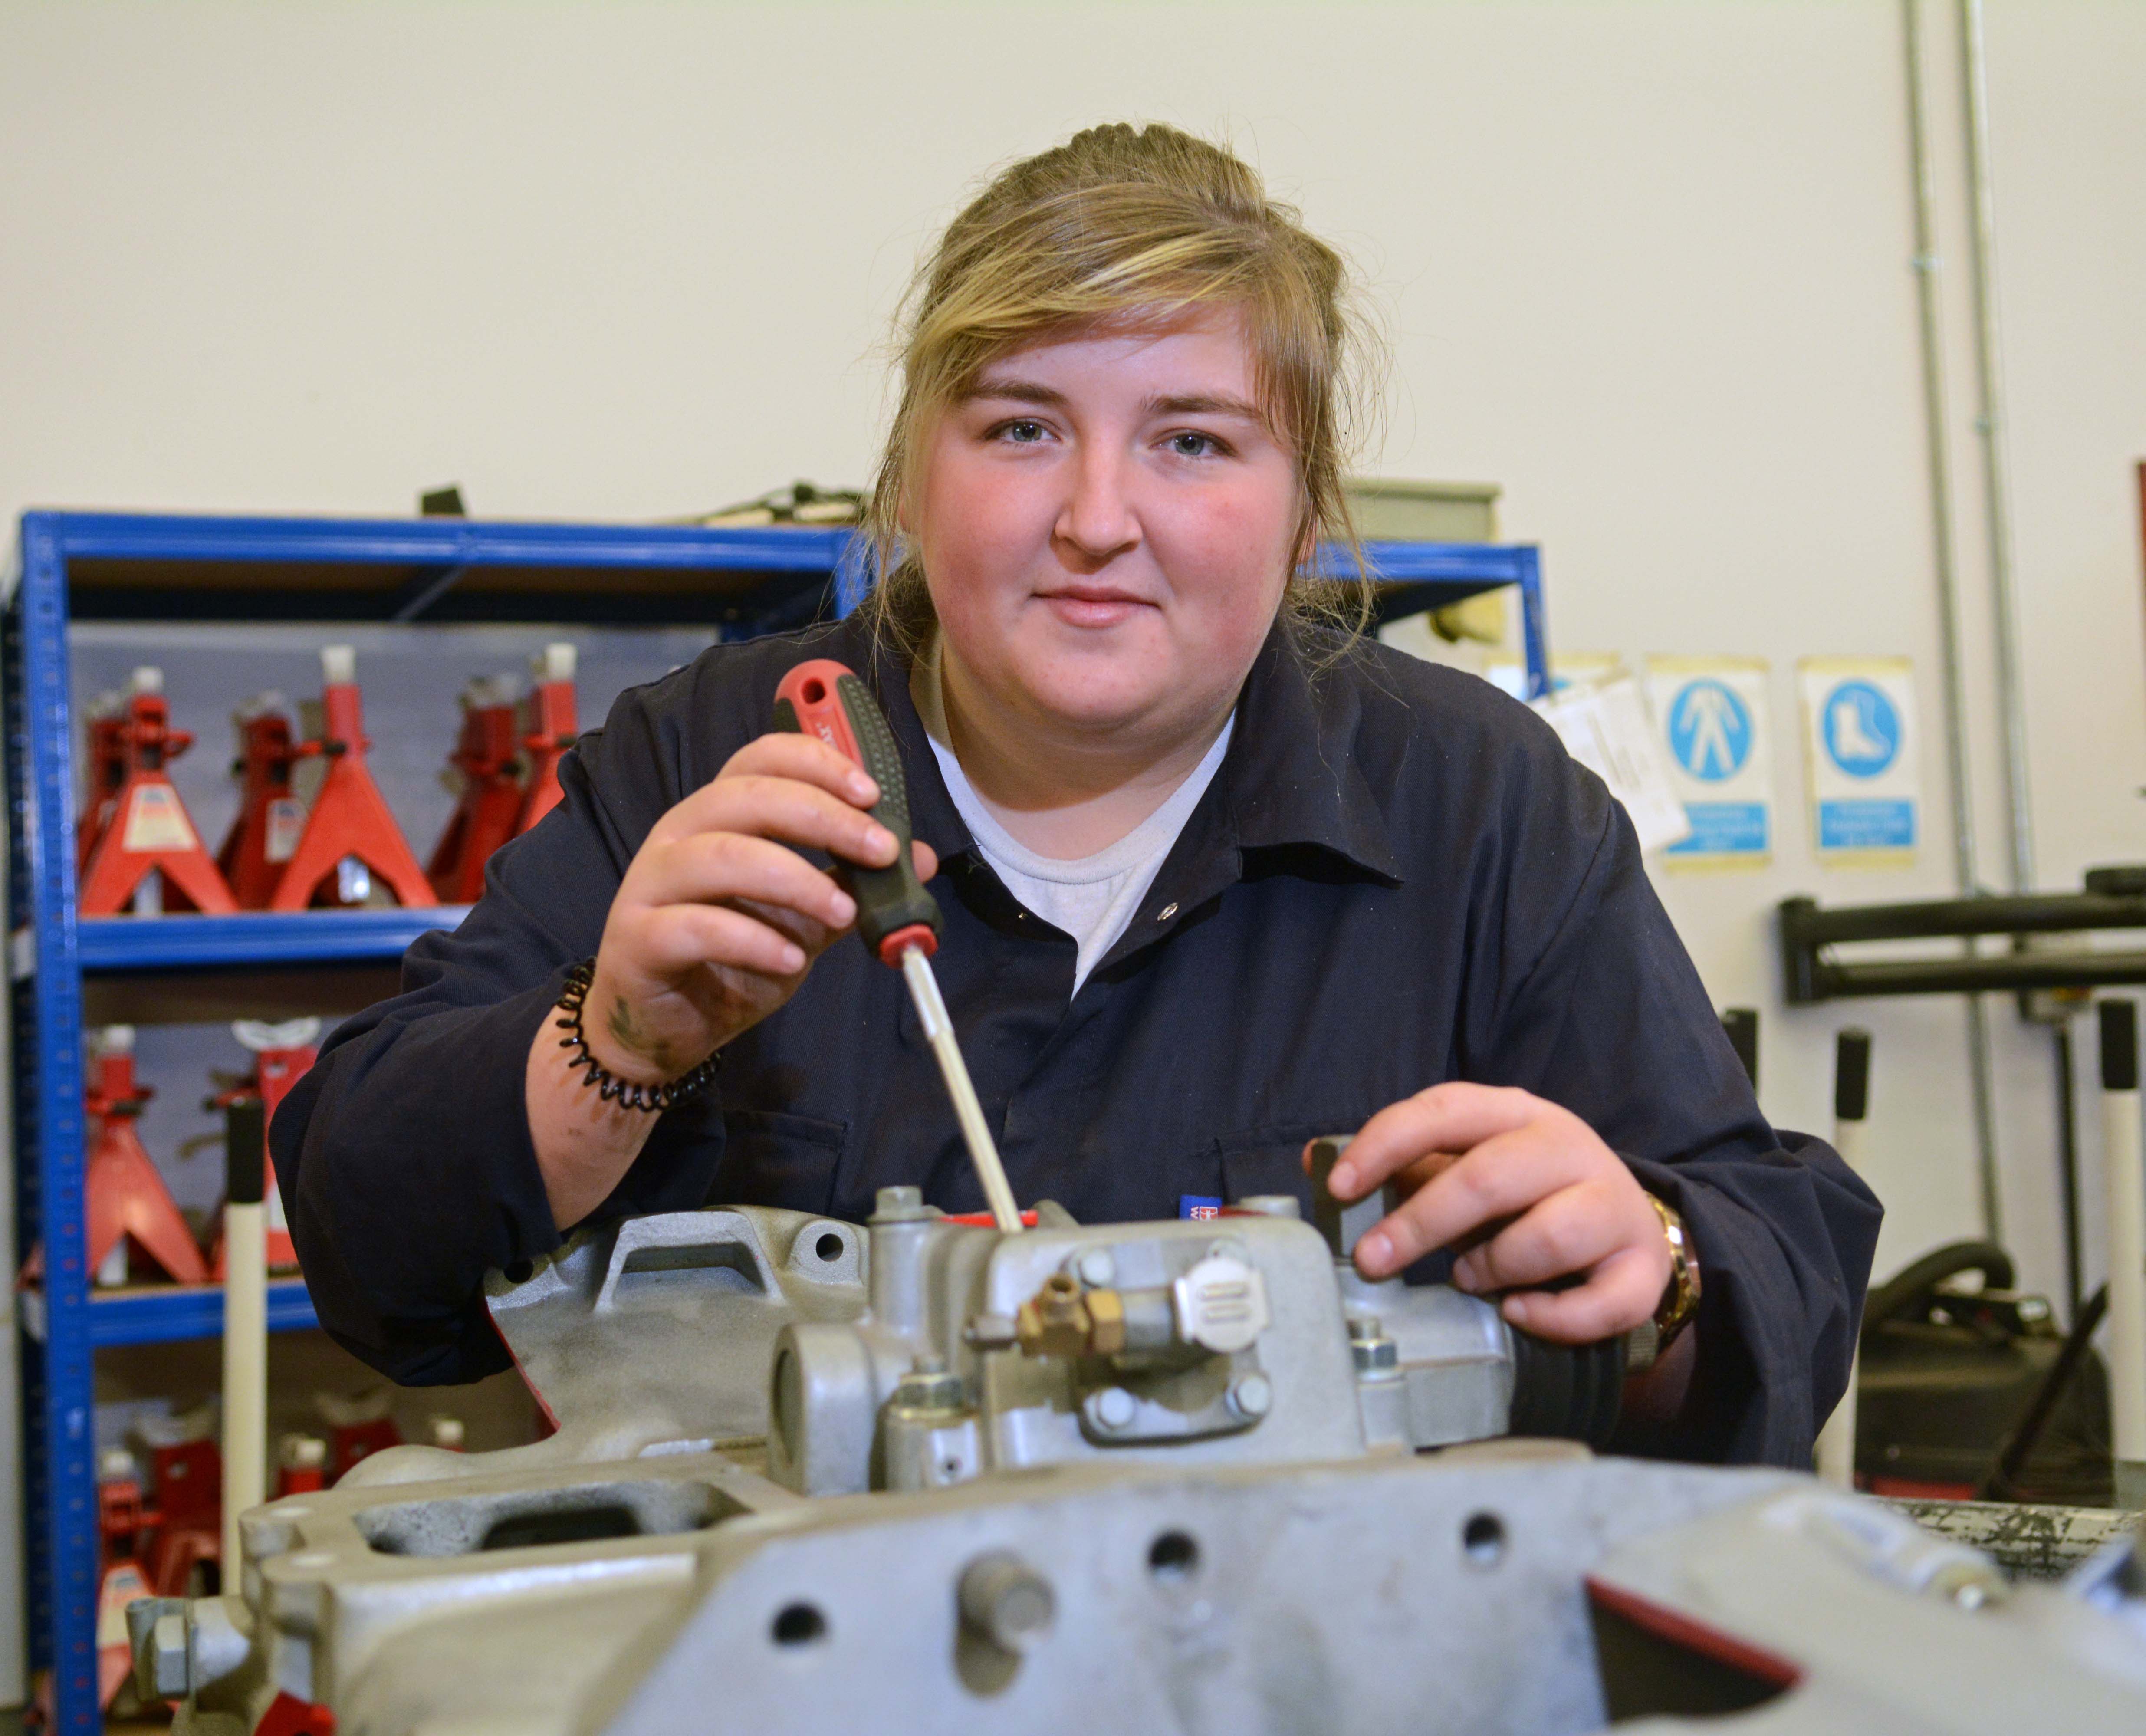 Motoring ahead with Ayrshire College.girl with engine.jpg